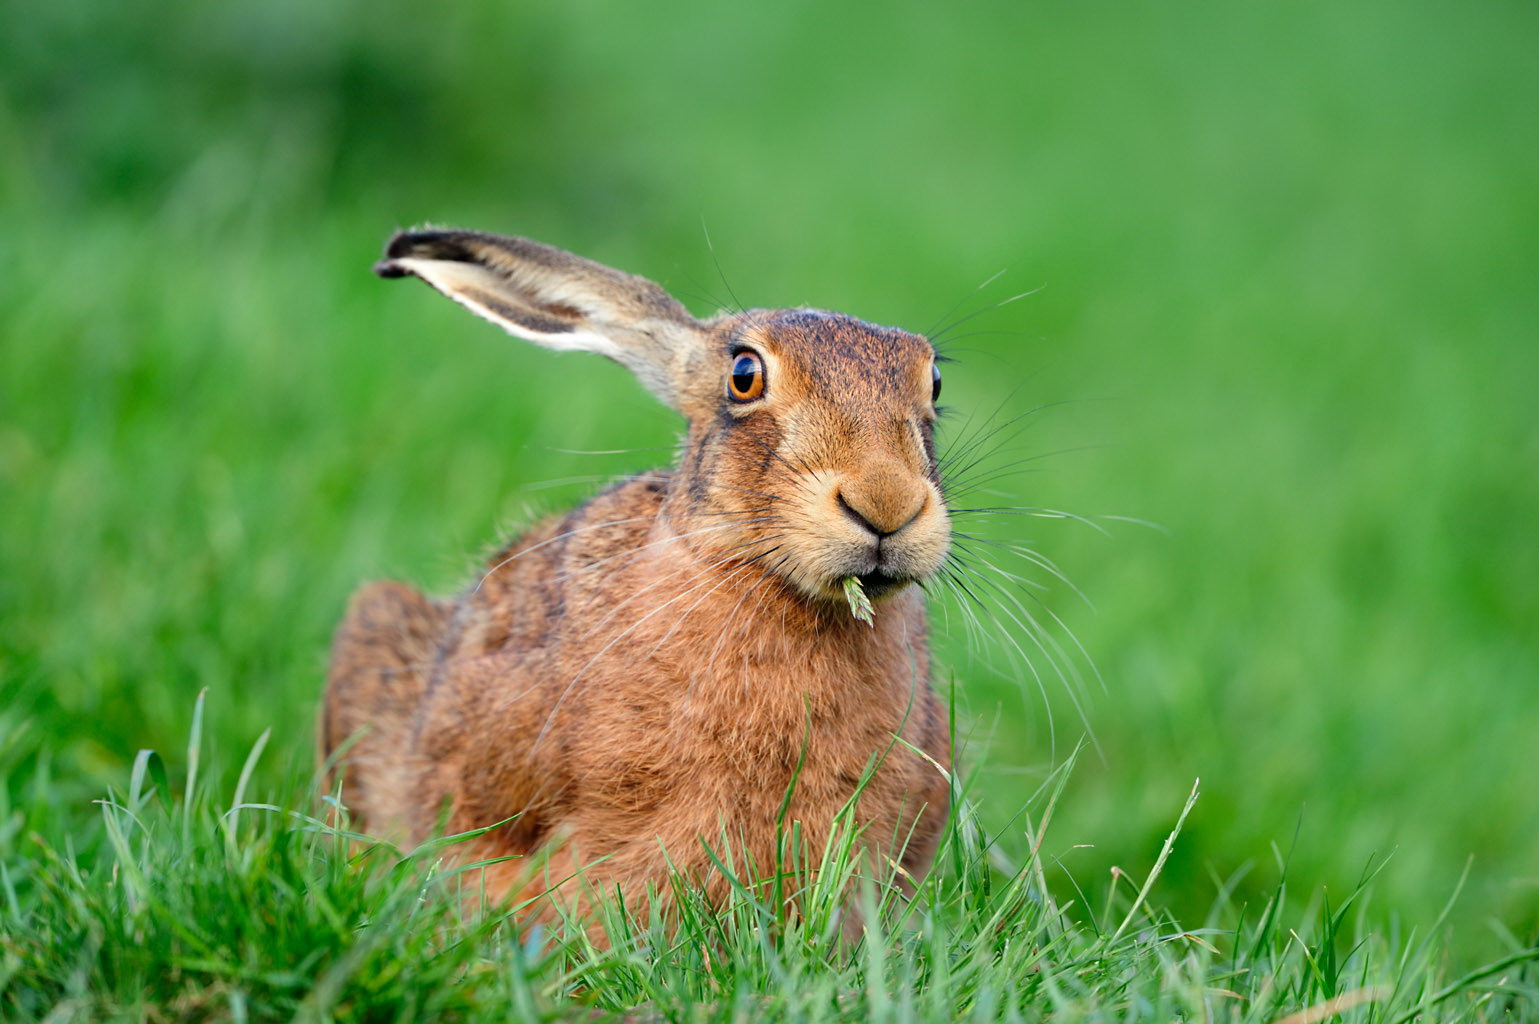 Hare eating grass